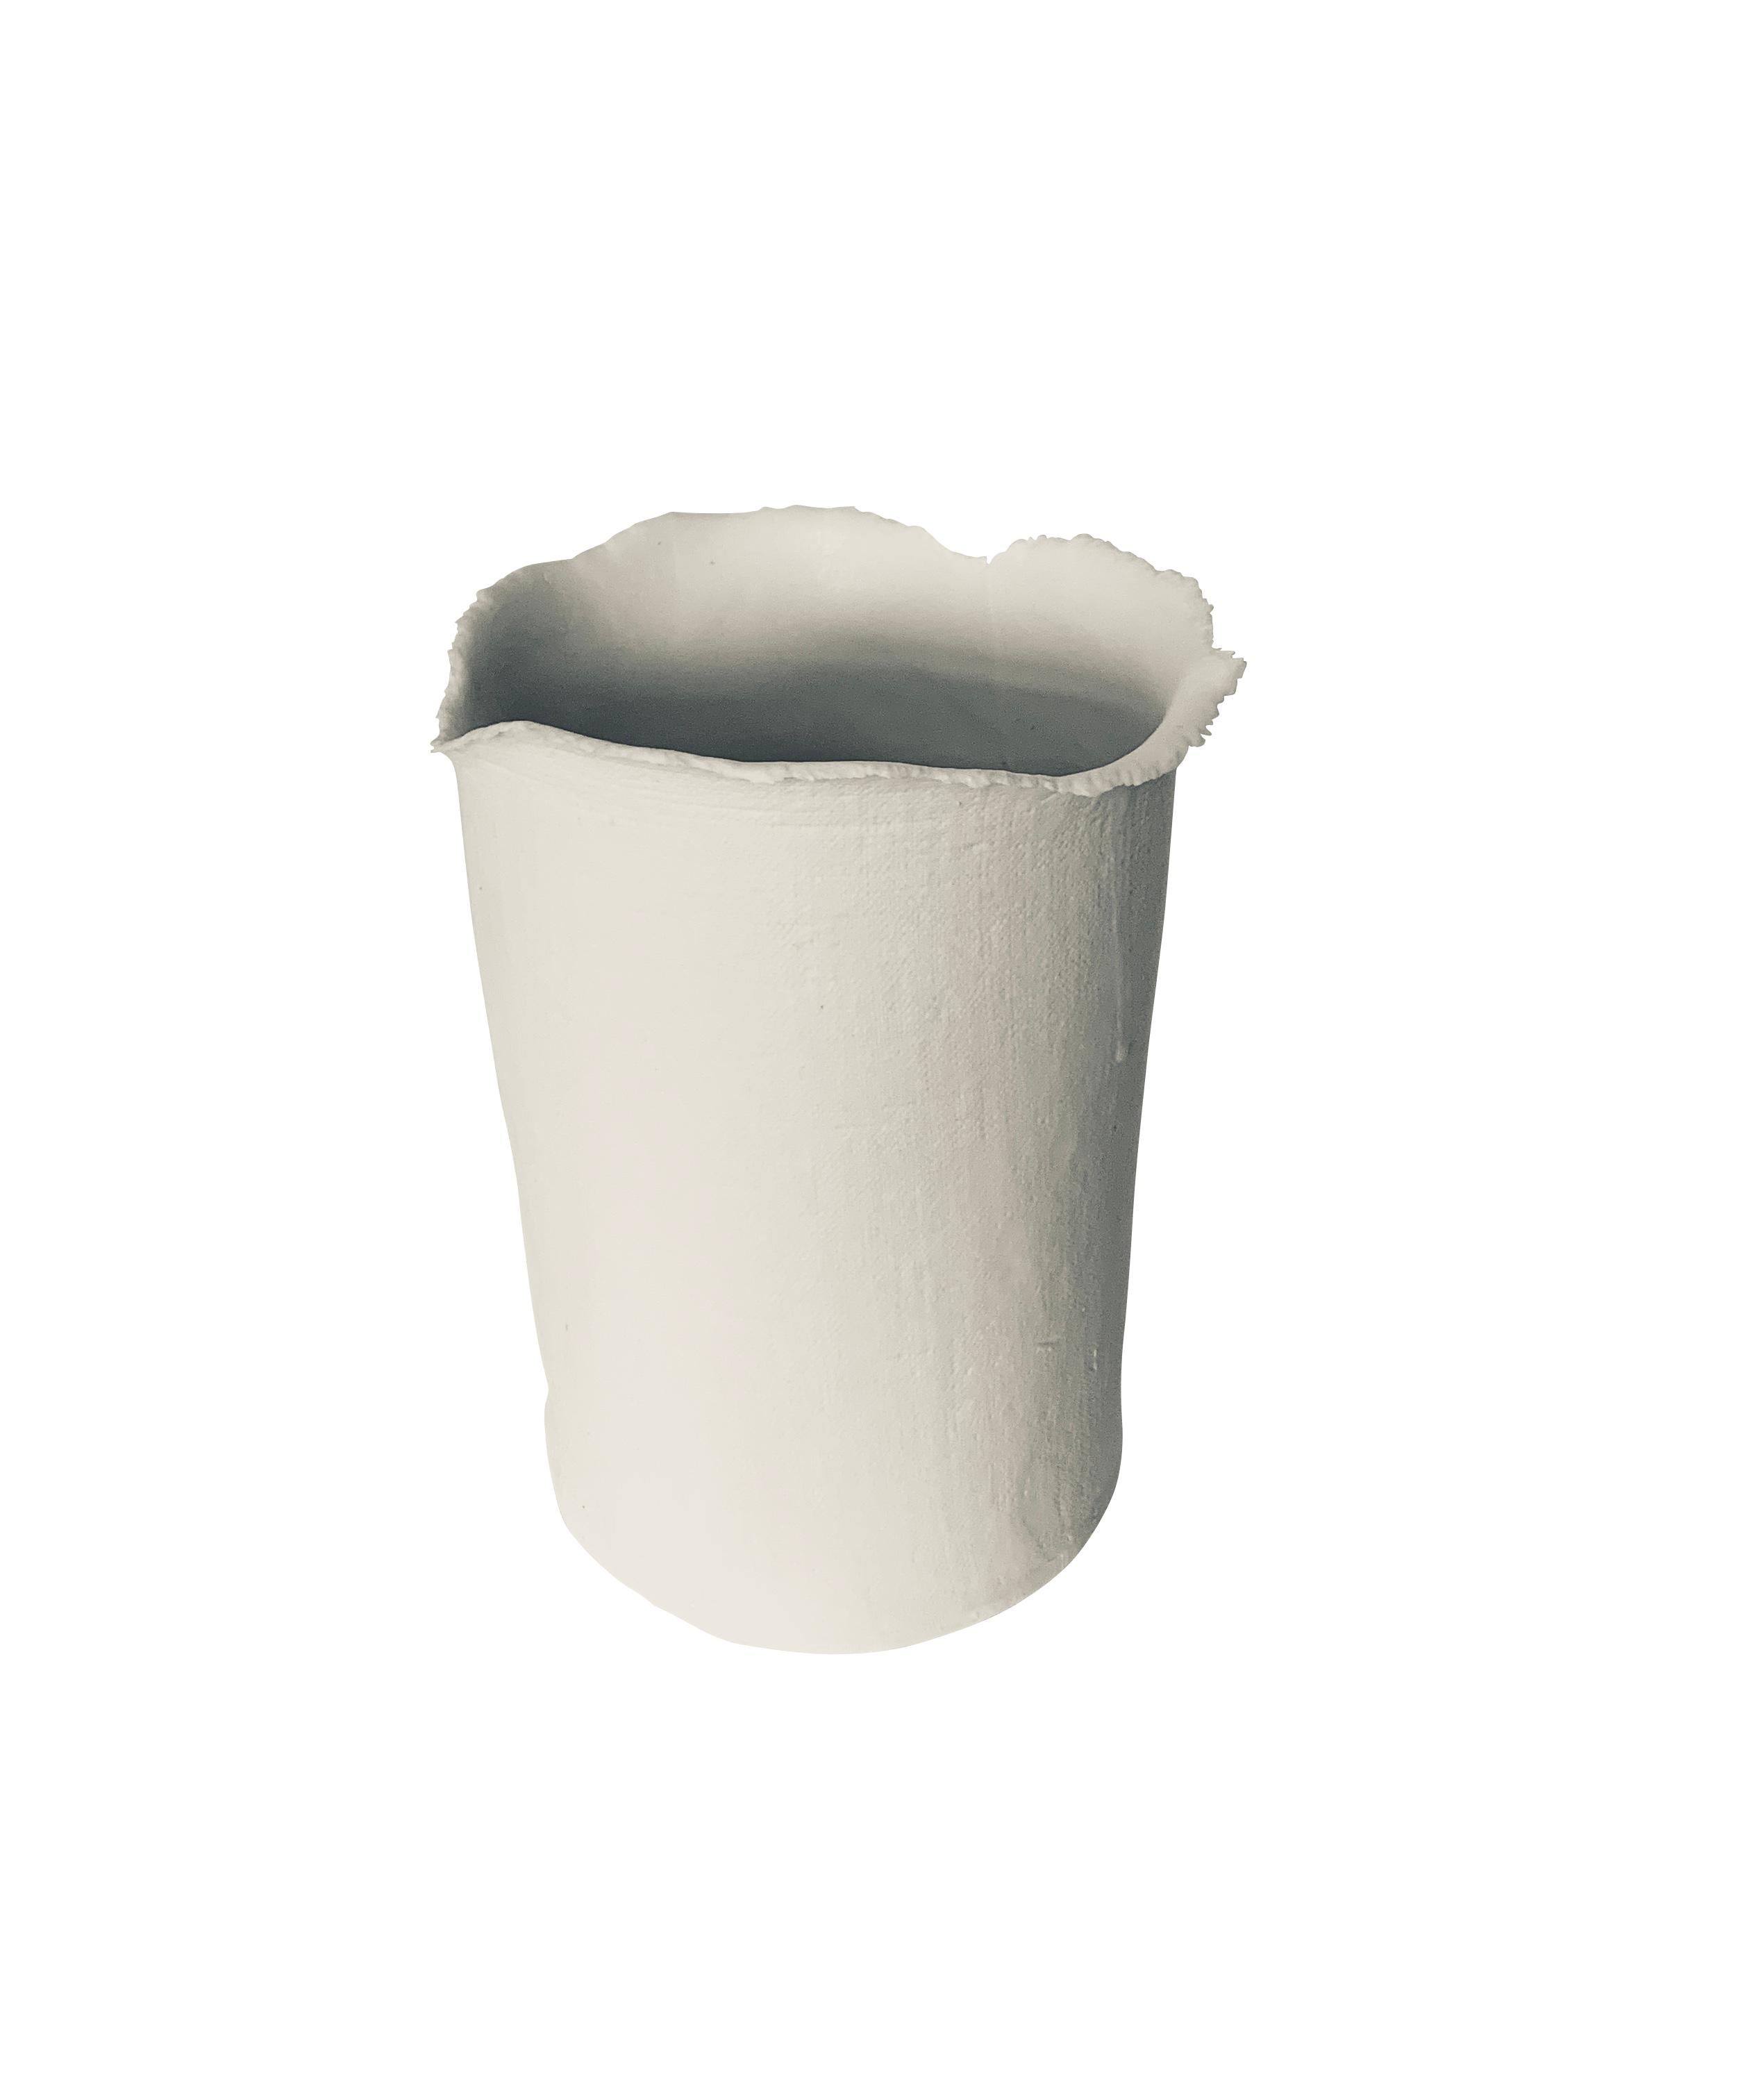 Contemporary French handmade white fine ceramic cylinder shaped vase is a one of a kind piece.
The vase is fine ceramic with a textured surface that looks like linen.
The mouth of the vase has an unfinished rough edge detail.
A collection of five